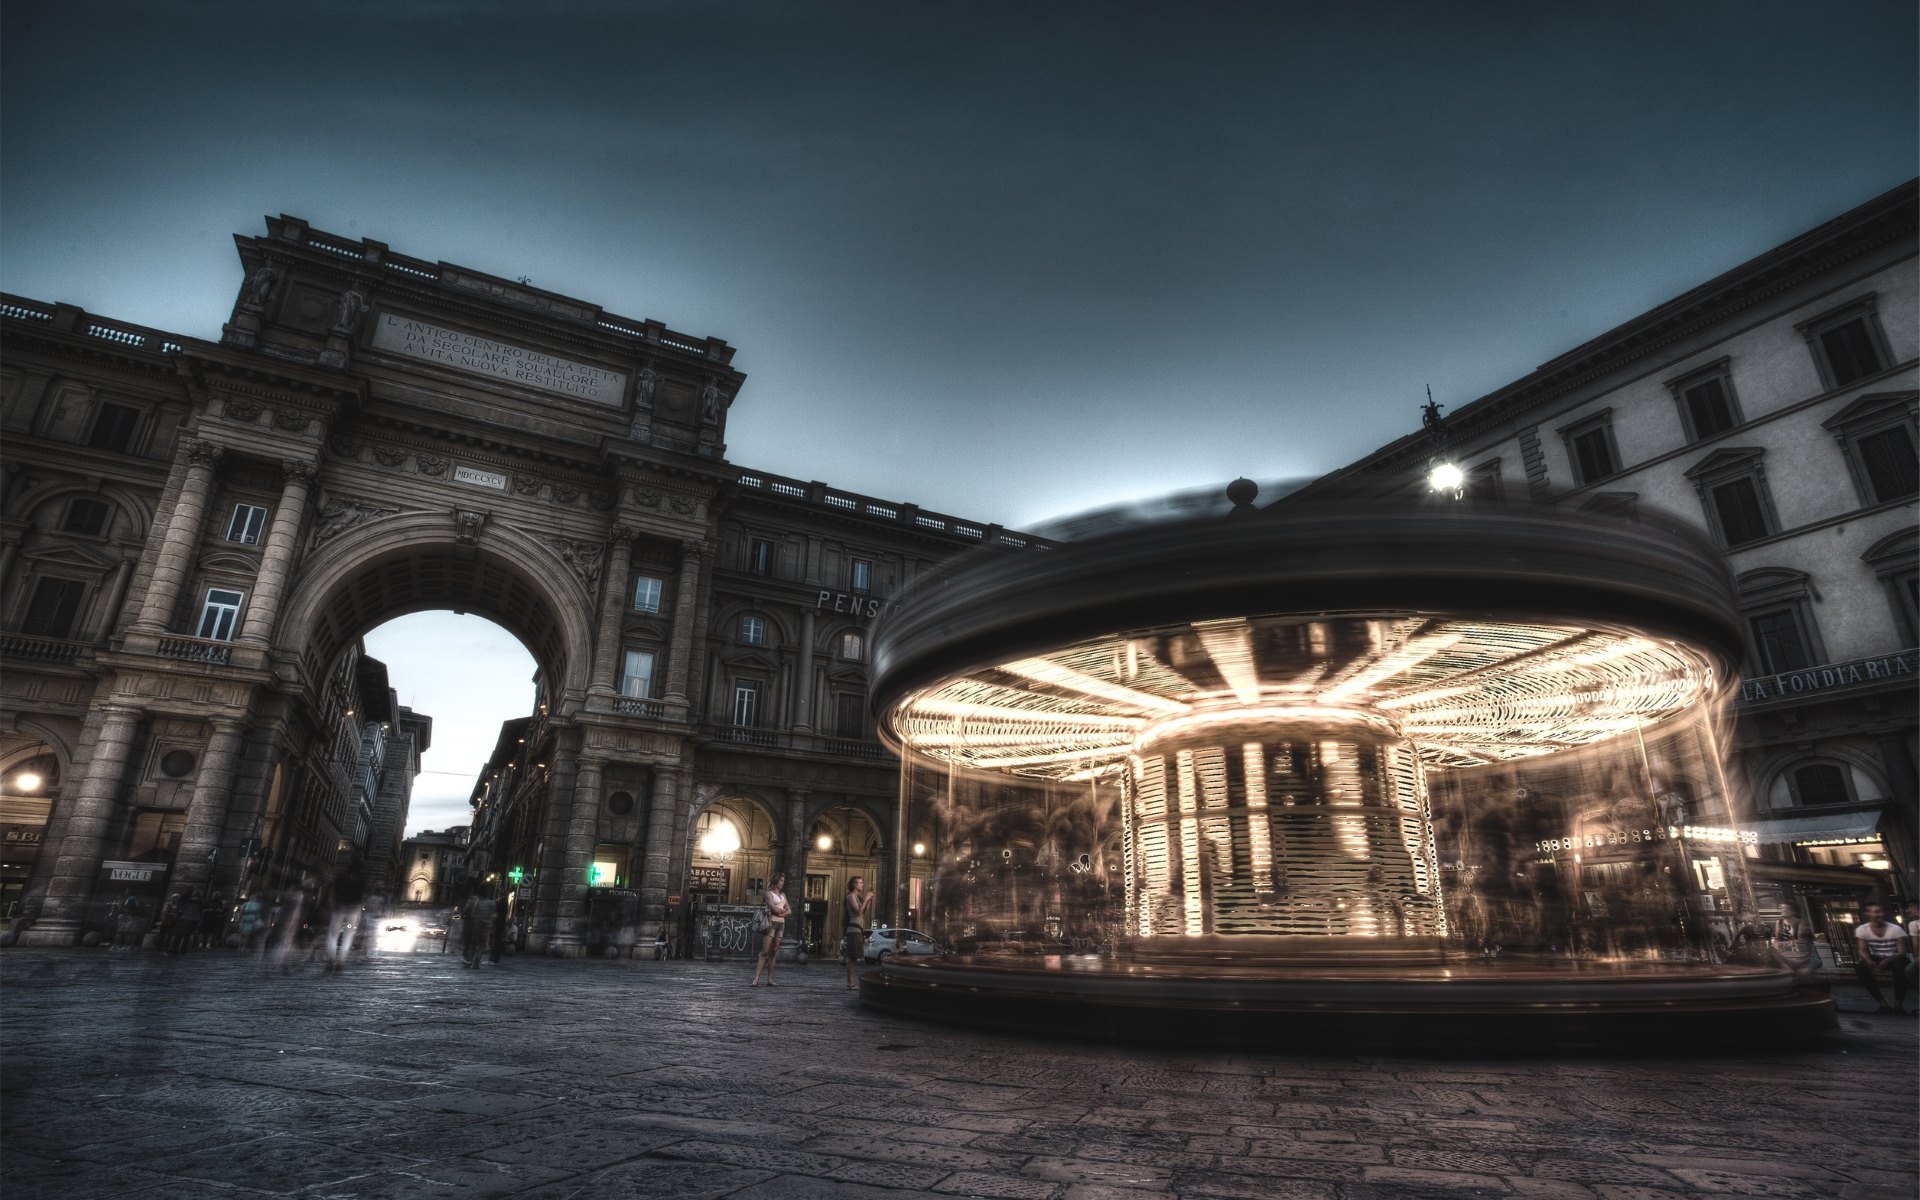 carousel, man made, florence, architecture, building, hdr, night, cities wallpapers for tablet